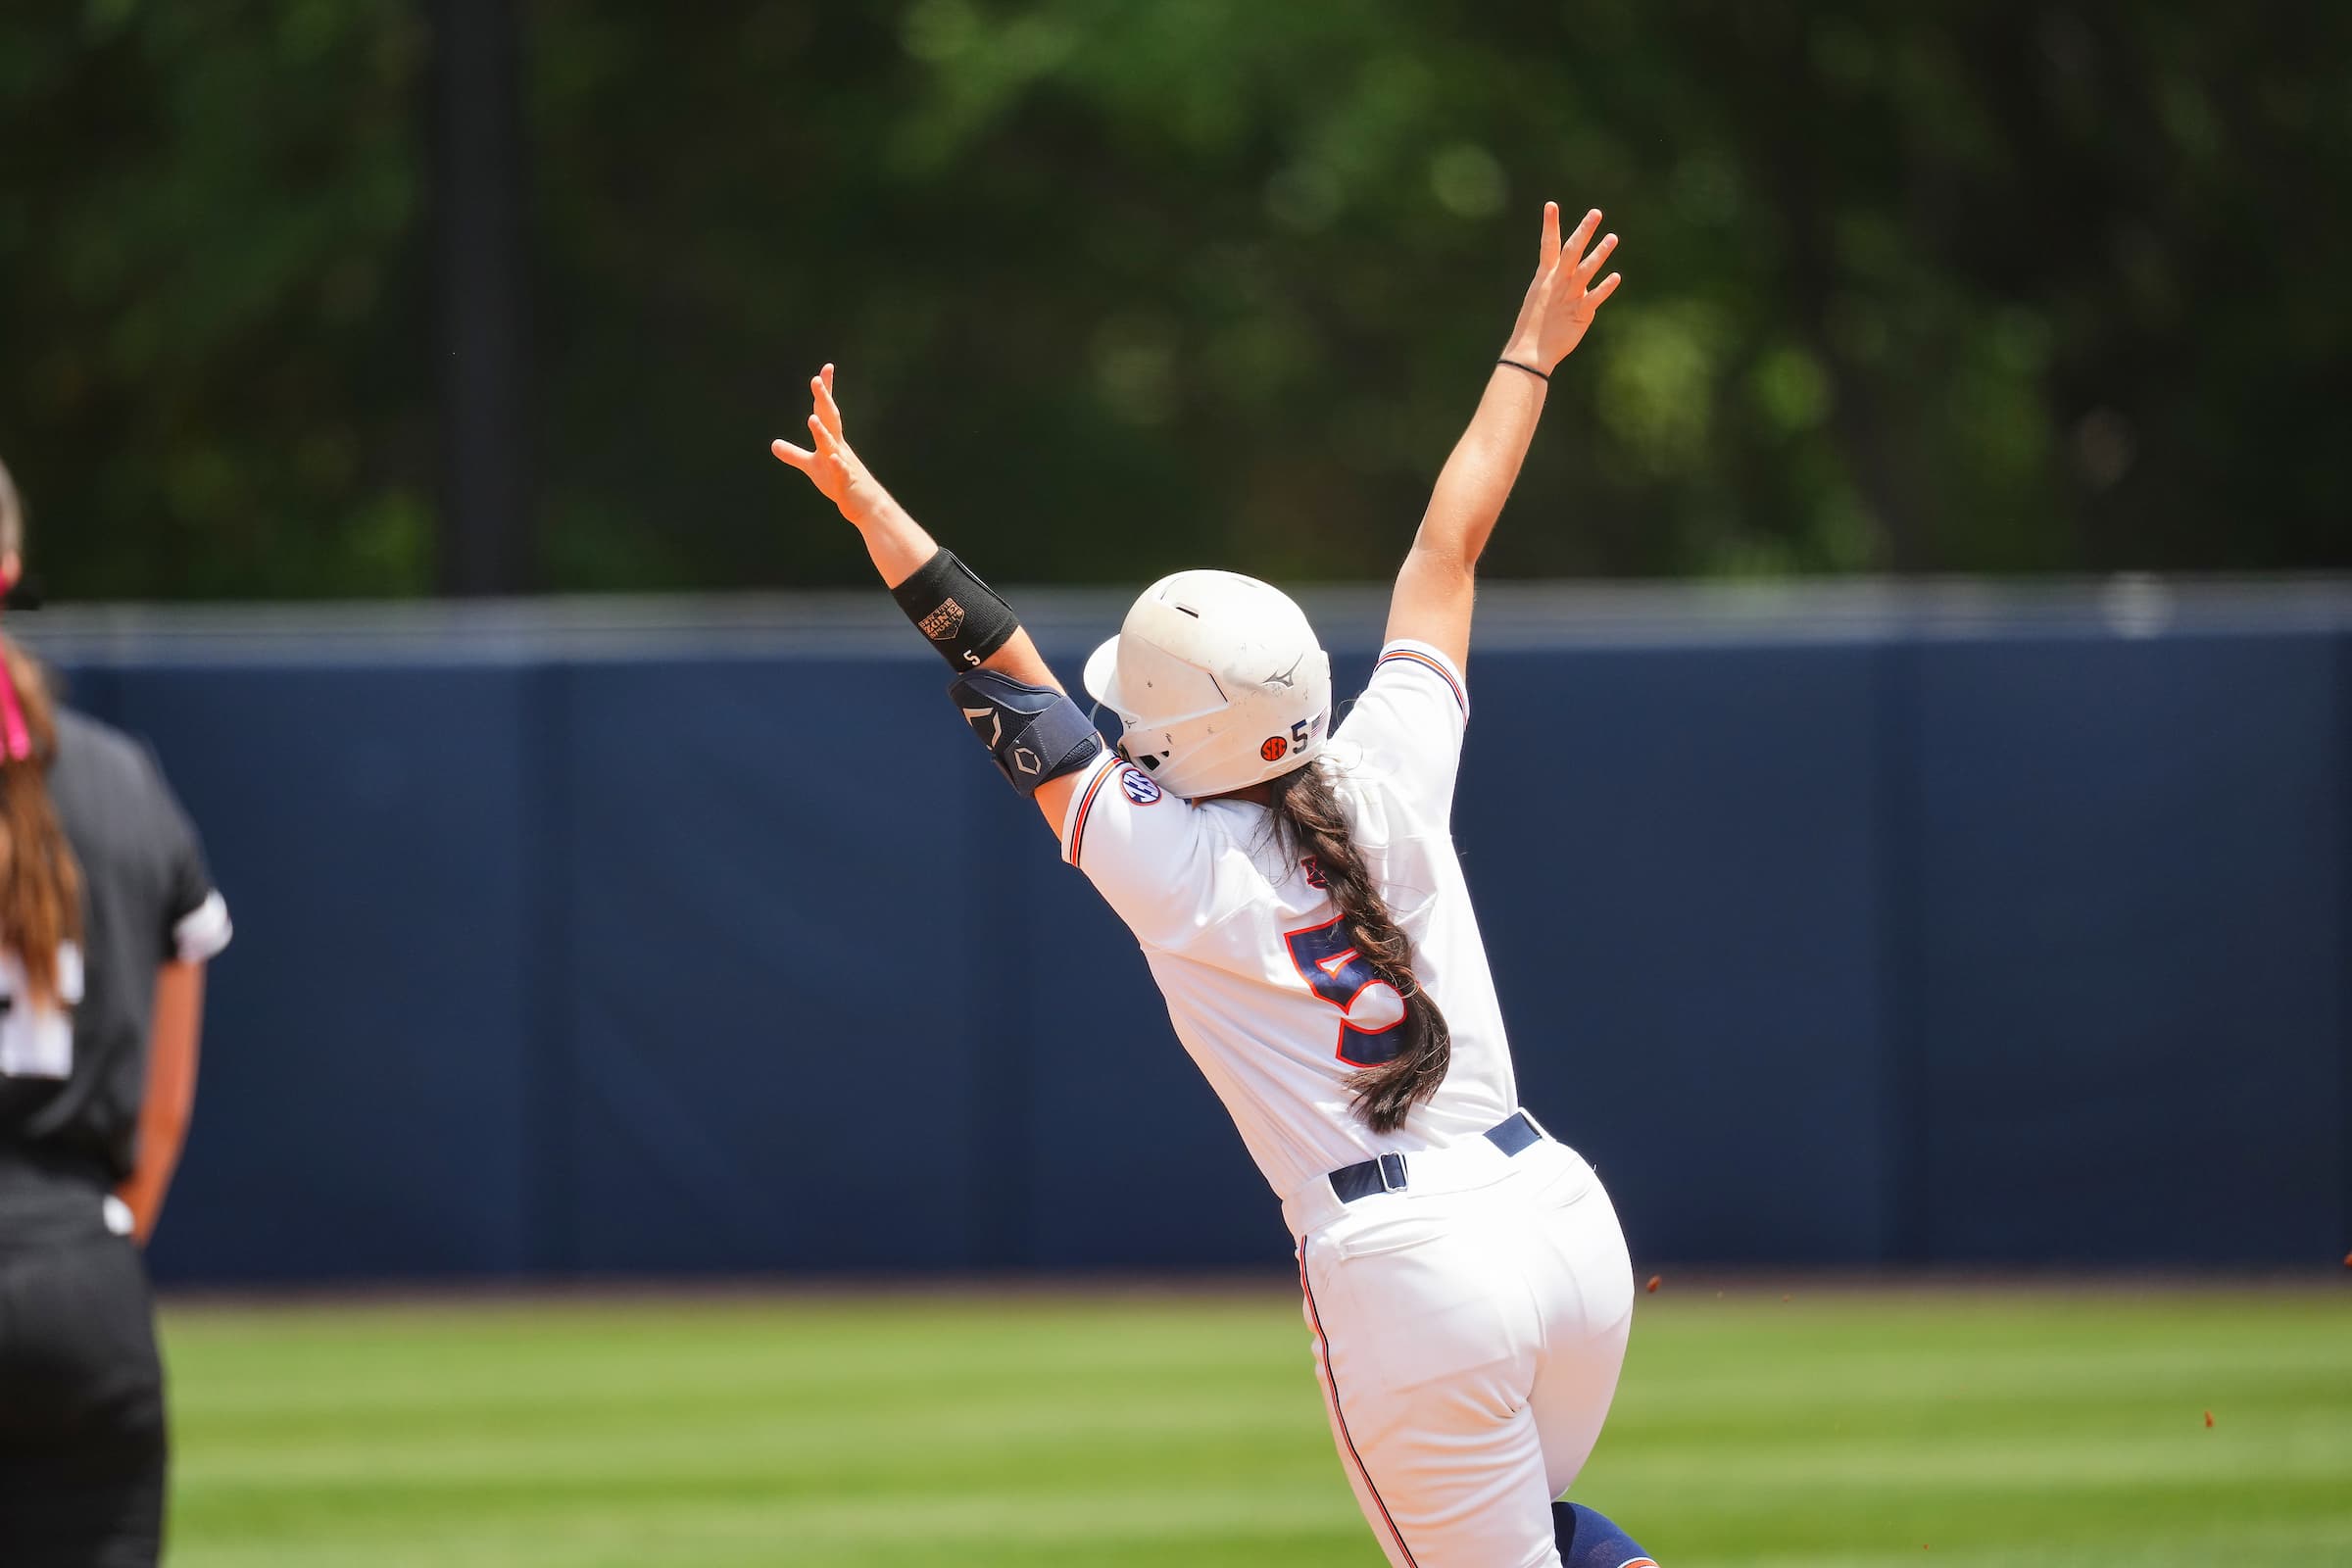 Lindsey Garcia (5) during the game between the Mississippi State Bulldogs and the #15 Auburn Tigers at Jane B. Moore Field in Auburn, AL on Sunday, May 7, 2023. Zach Bland/Auburn Tigers